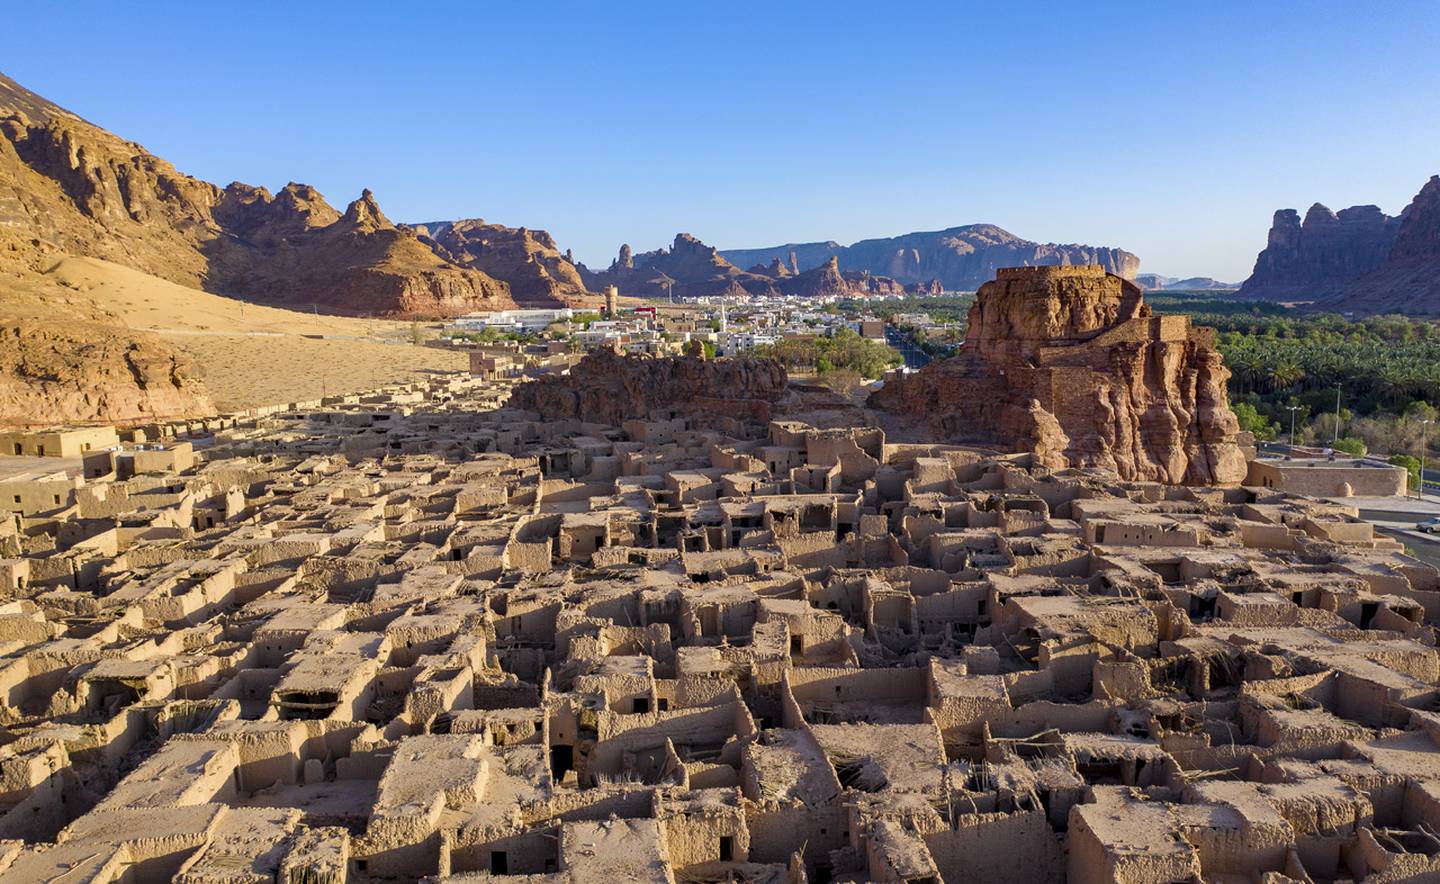 AlUla Old Town in Saudi Arabia is recognised as one of the Best Tourism Villages by the UN World Tourism Organisation